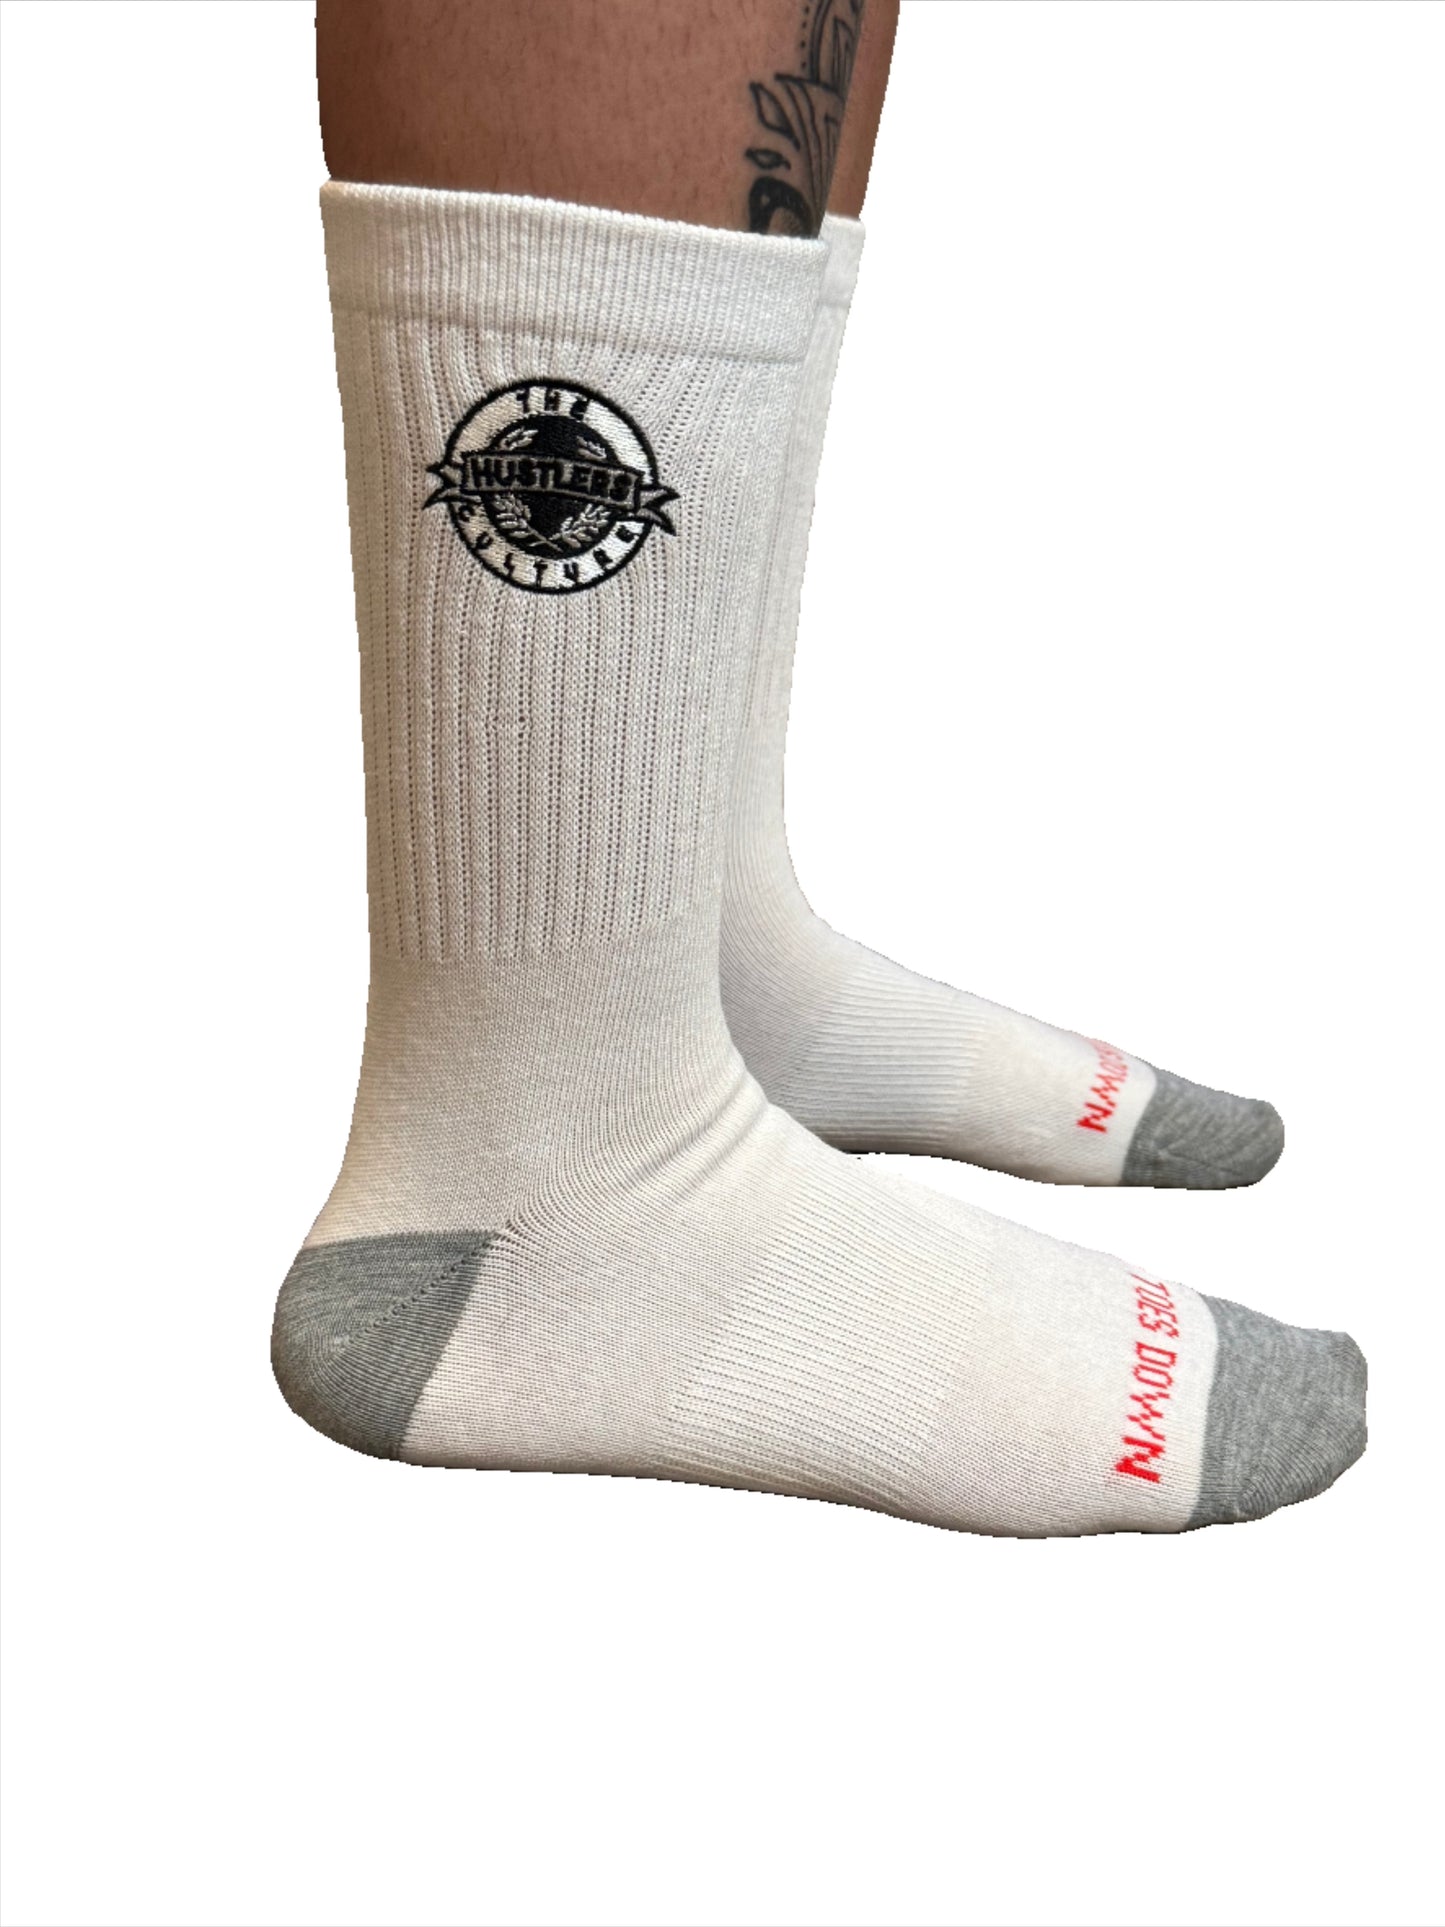 Embroidered "Ten Toes Down" White Socks